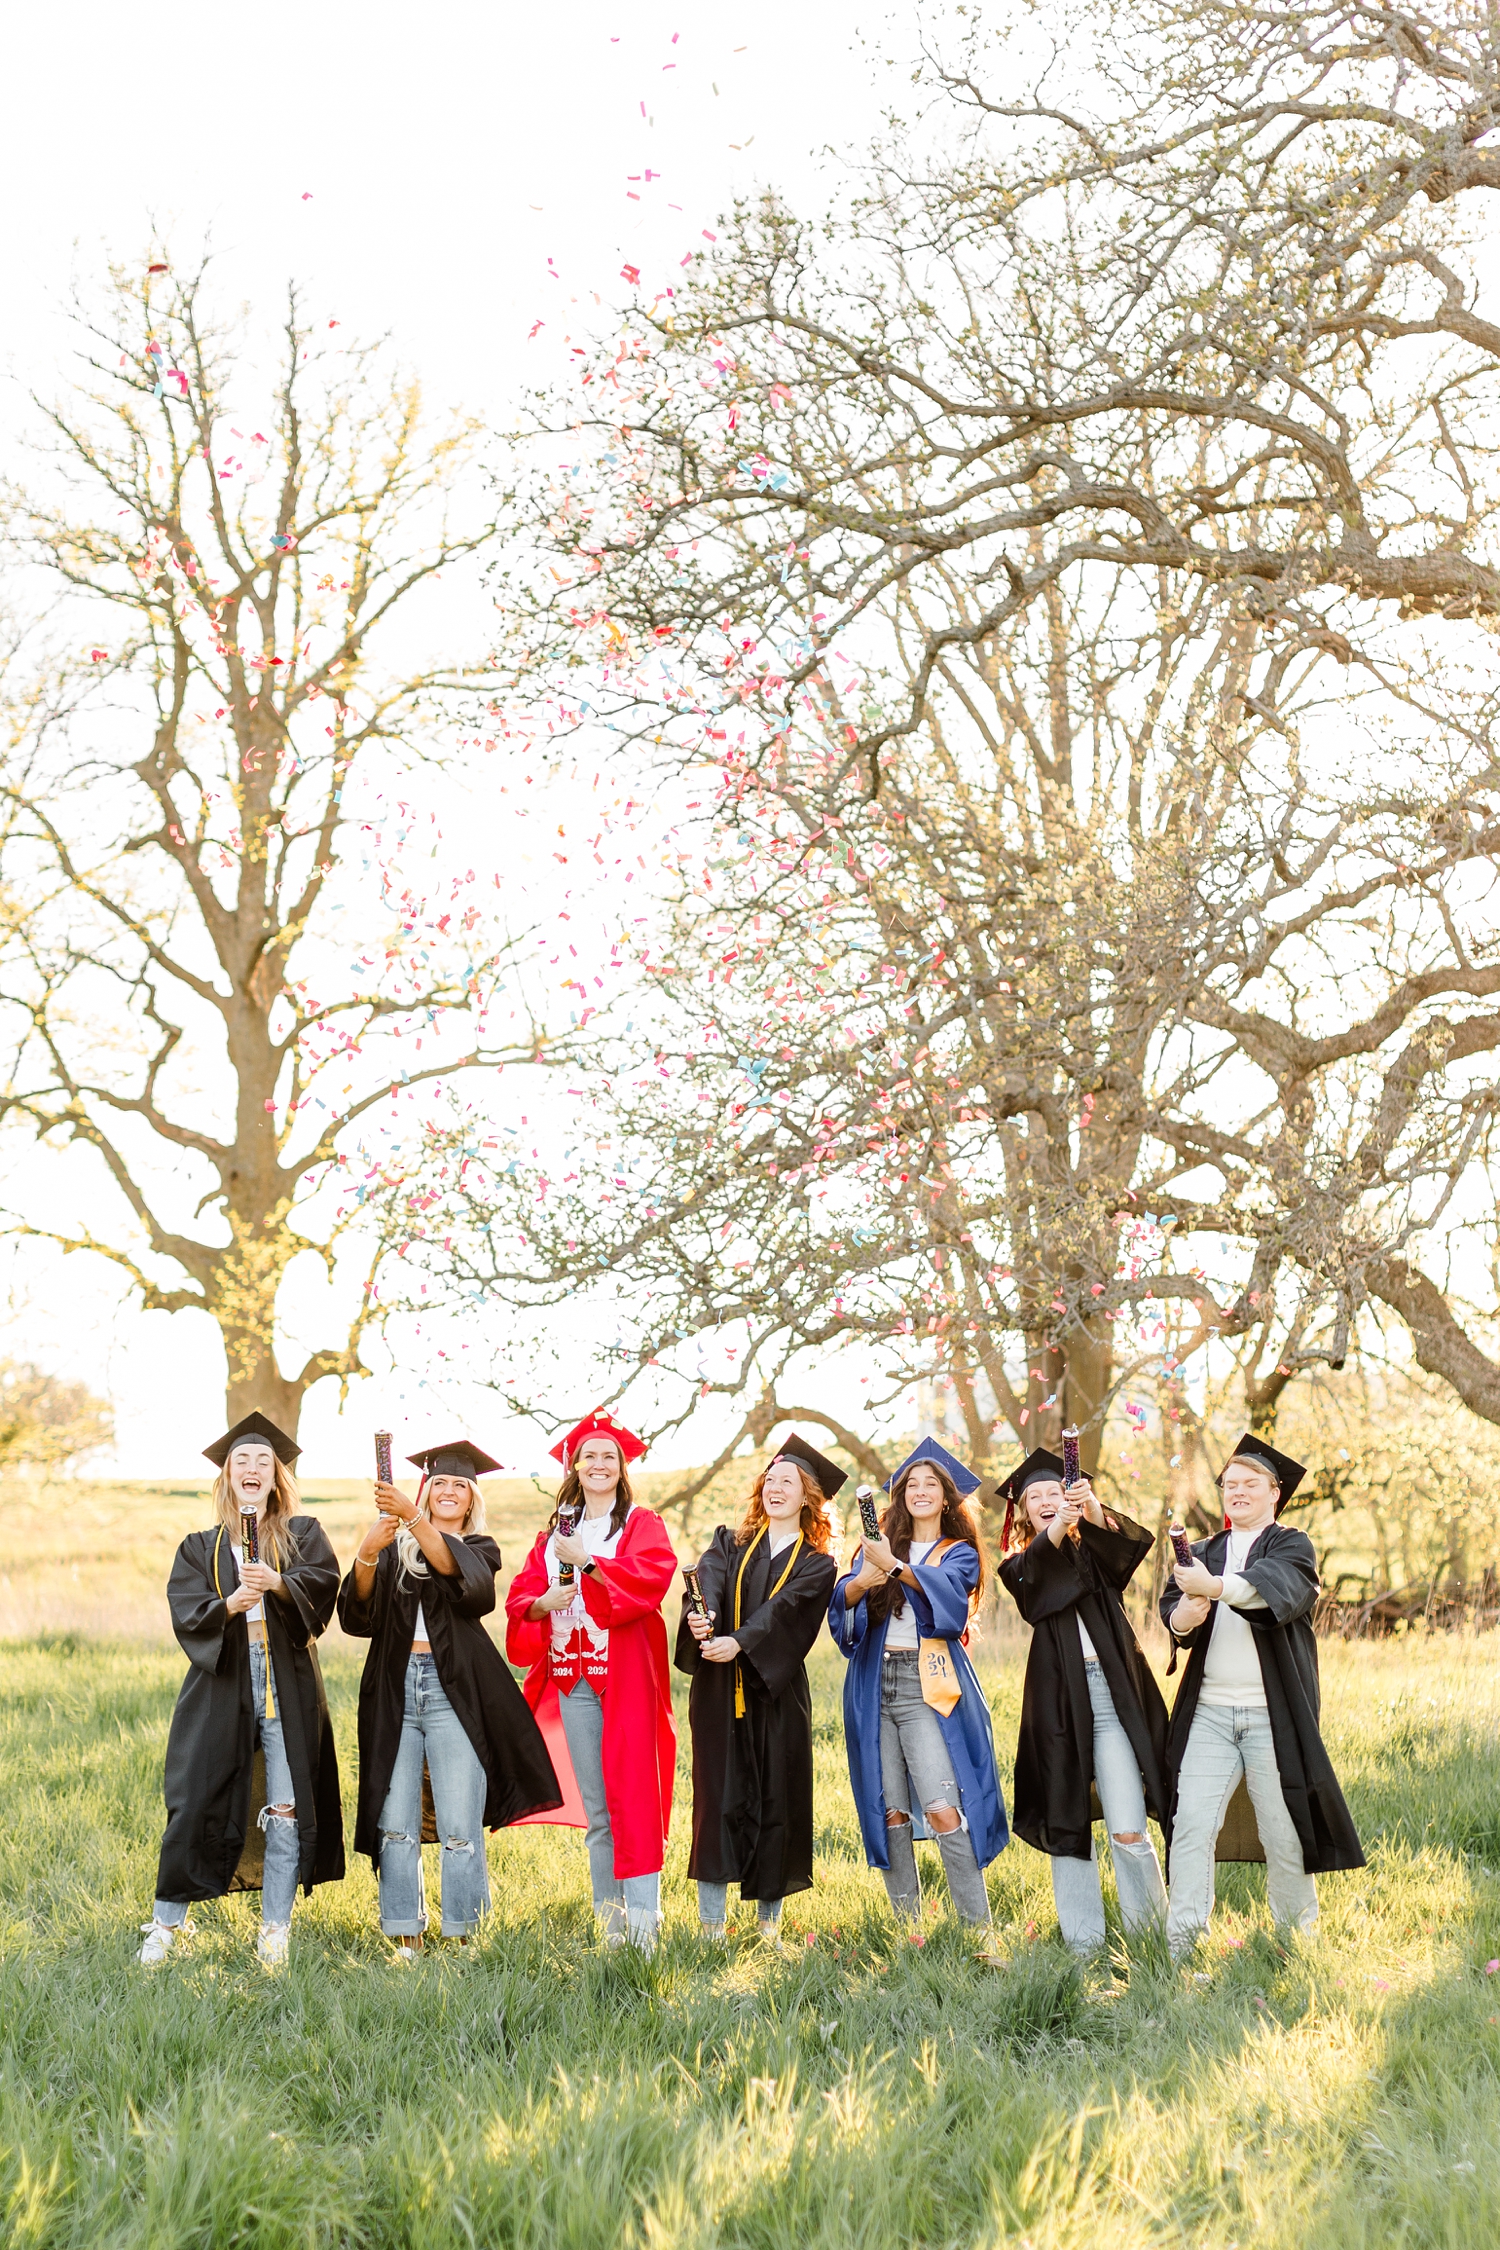 TEAM 24 shoot confetti canons in a grassy pasture while wearing their graduation cap & gowns to celebrate graduating high school Class of 2024 | CB Studio